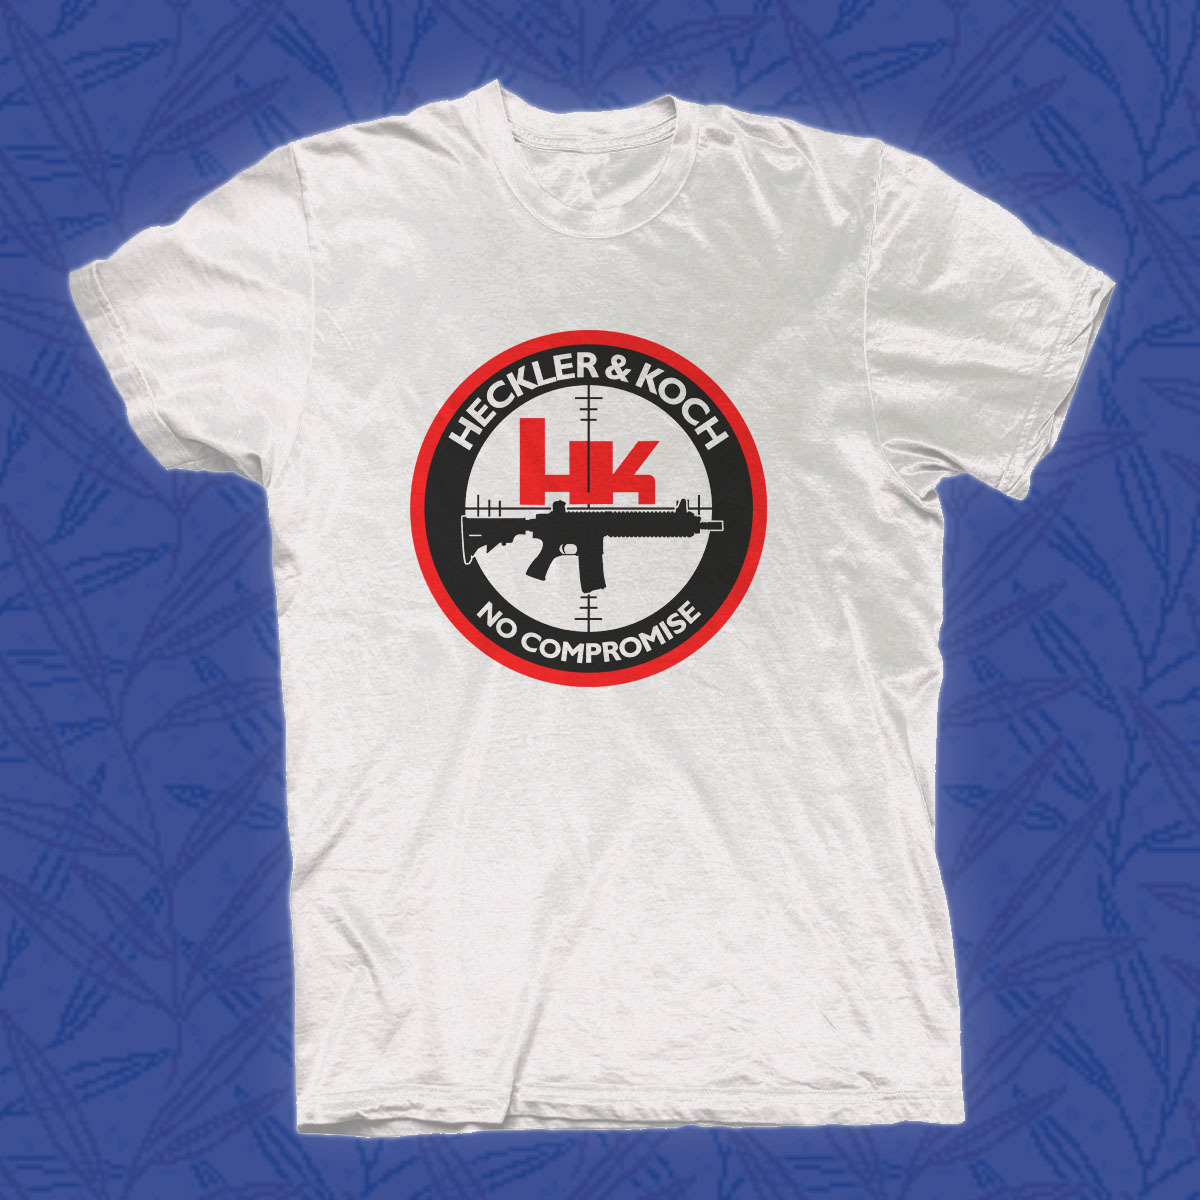 HK Logo Heckler & Koch No Compromise White T-Shirt Tee Size S-3XL.